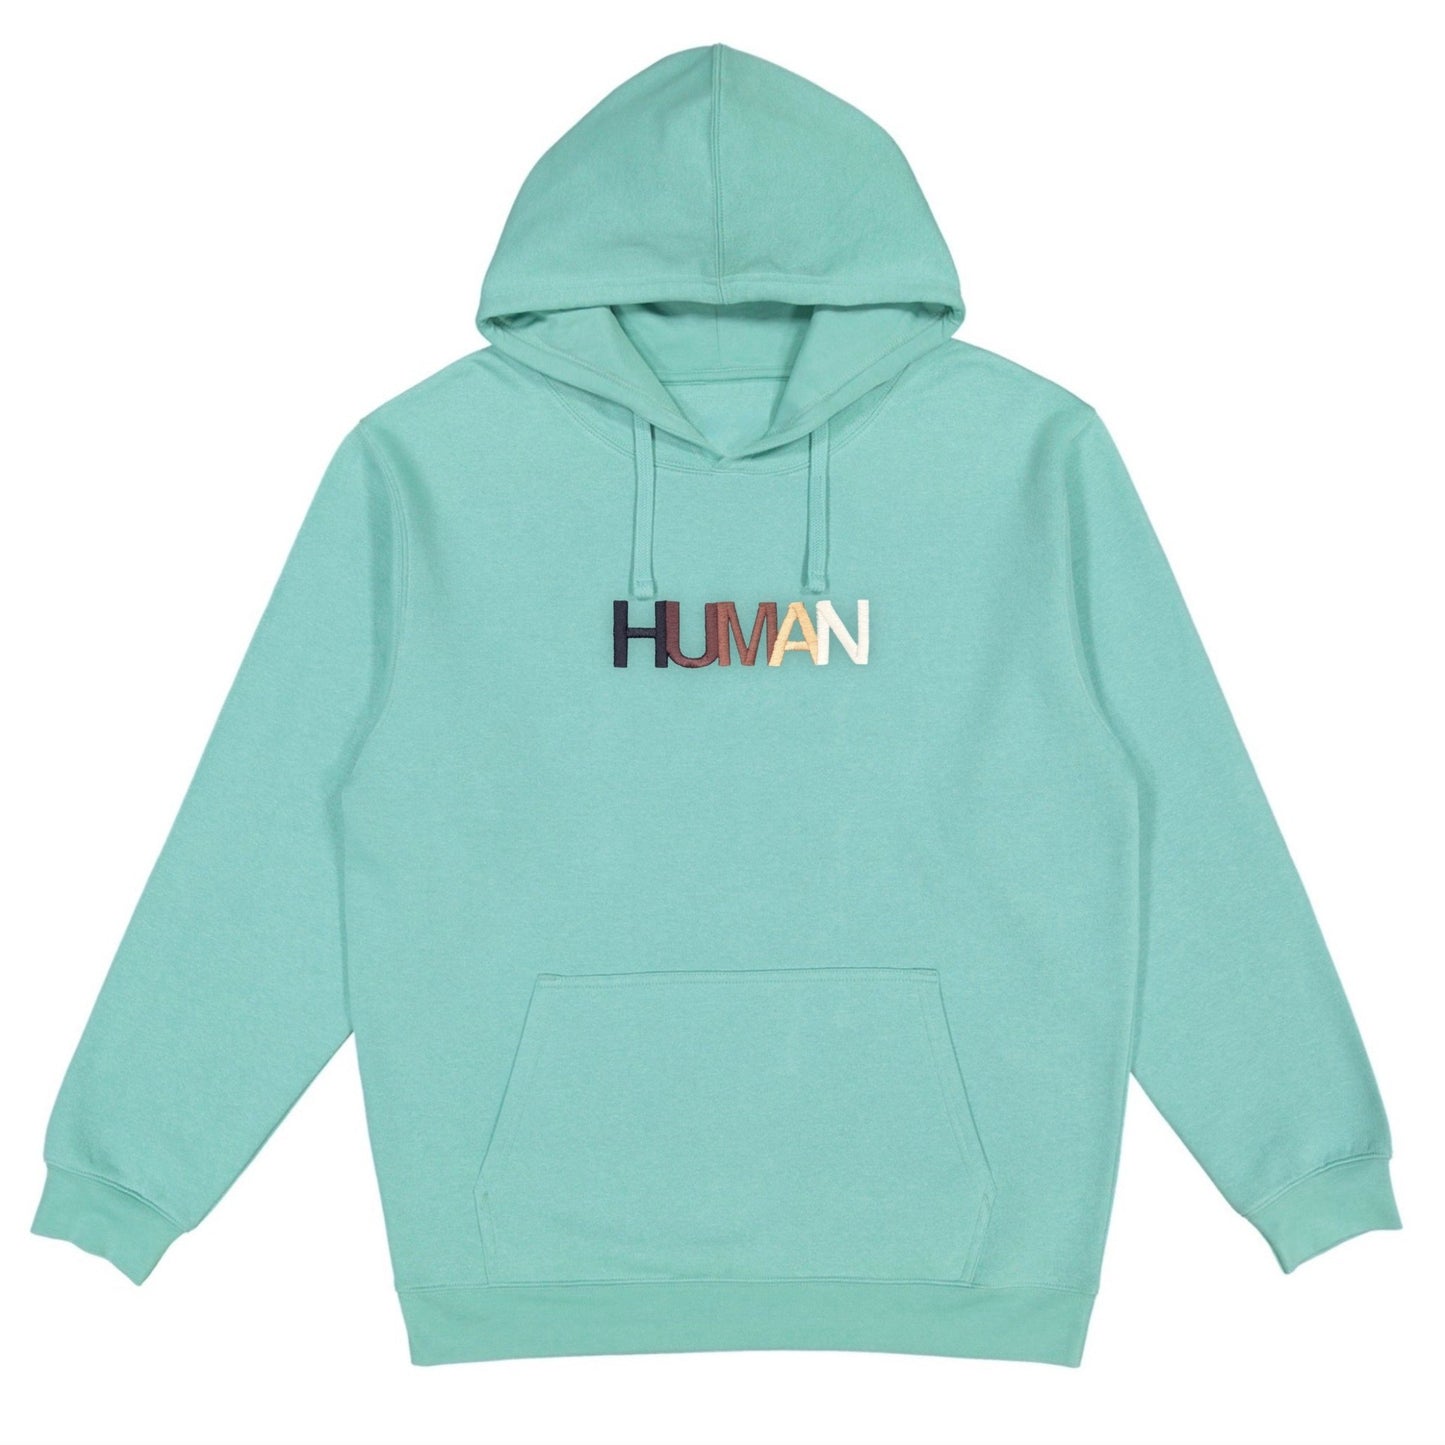 Human Embroidered Hoodie Wear The Peace Hoodies Saltwater S